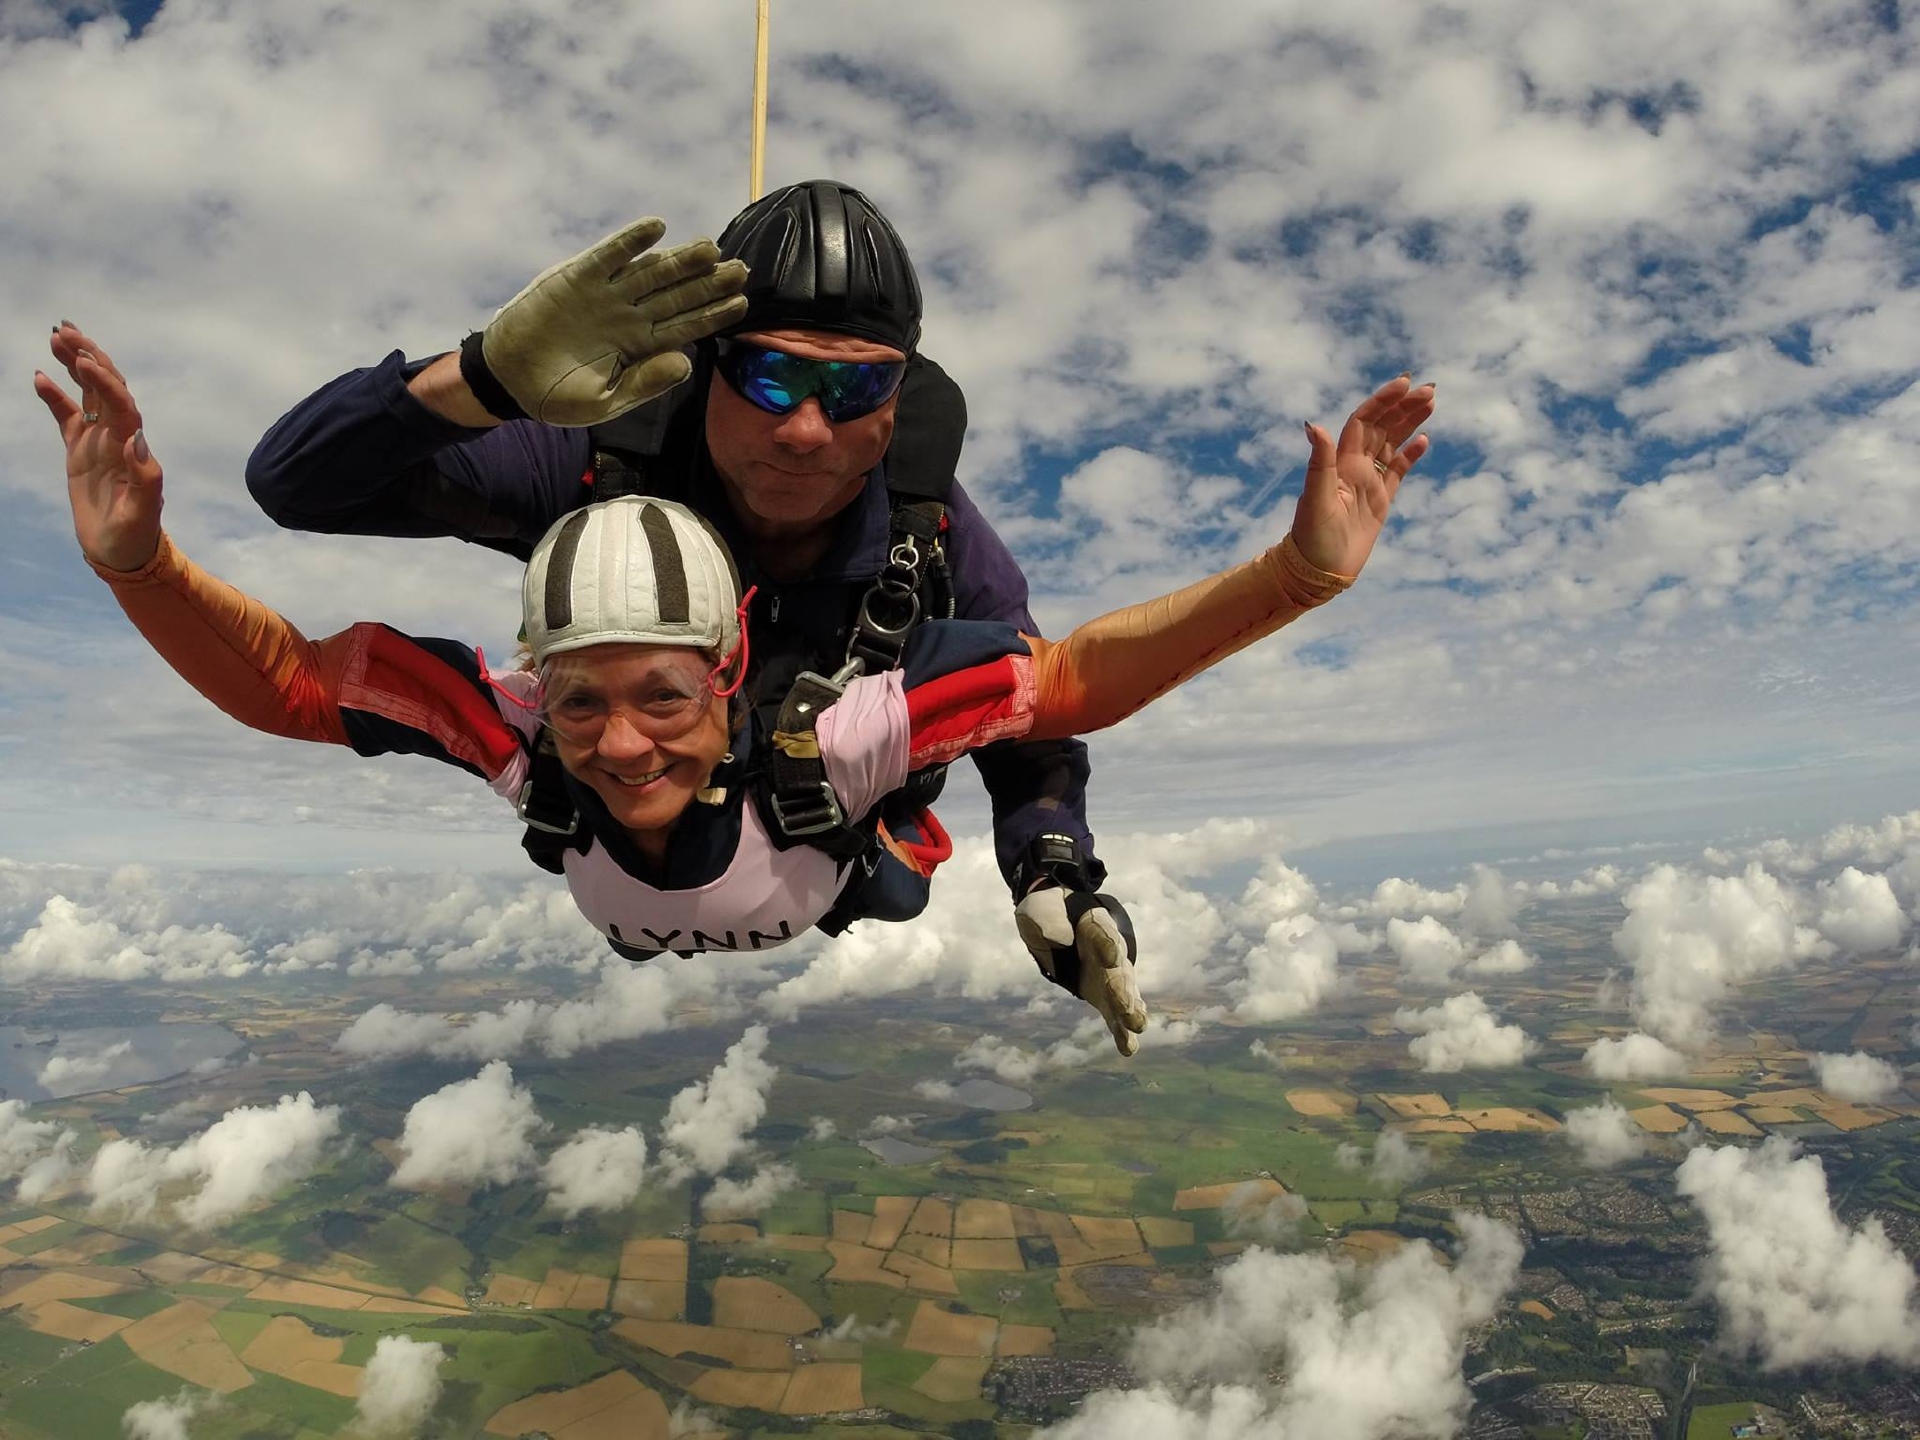 Will you do a skydive in 2018?